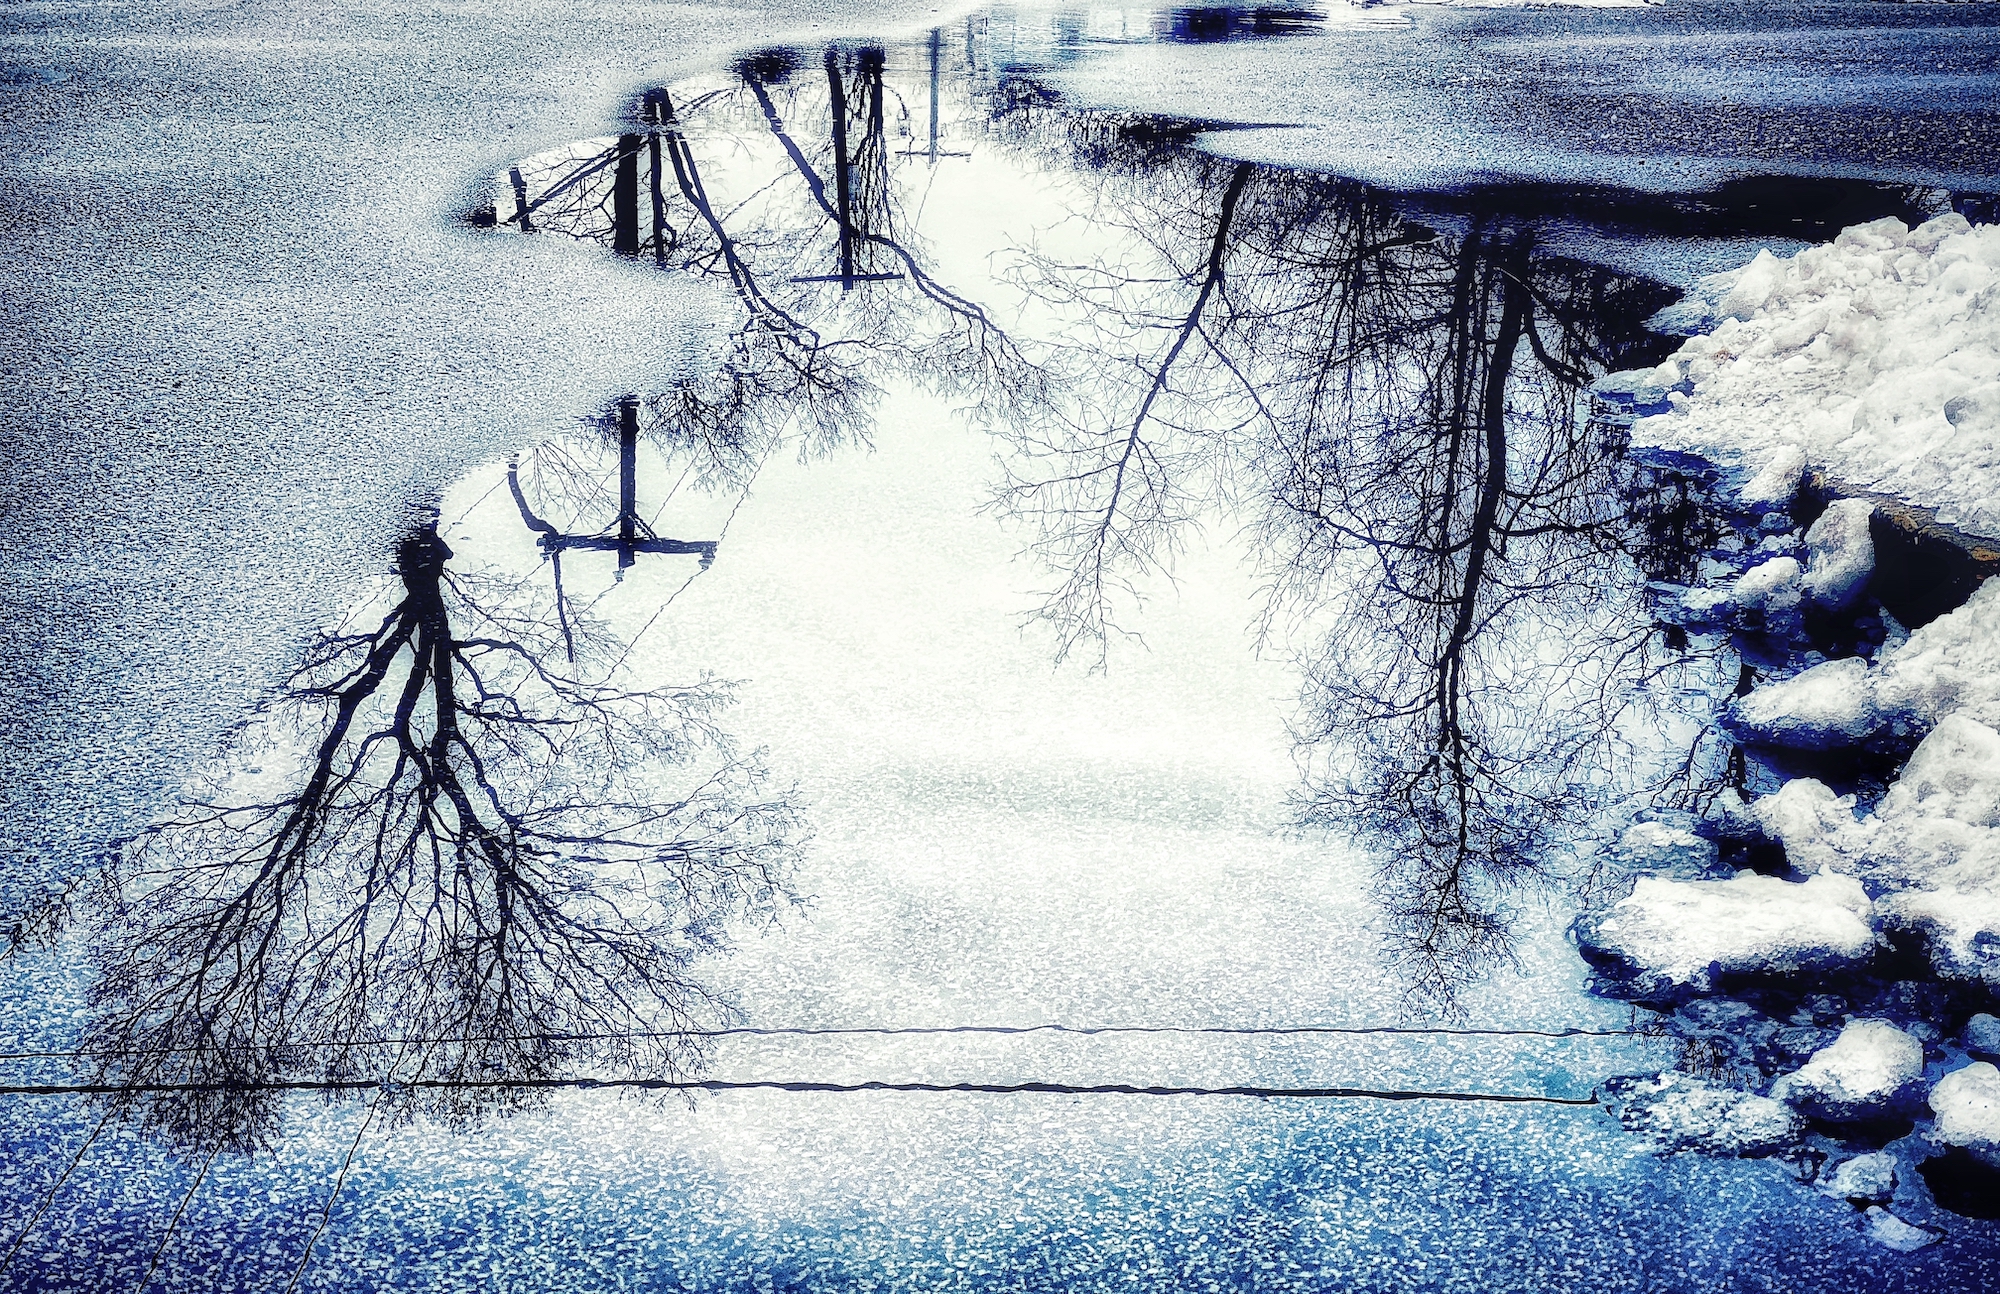 Trees and sky reflected in a puddle on asphalt, with a pile of snow showing on the right-side of the image.